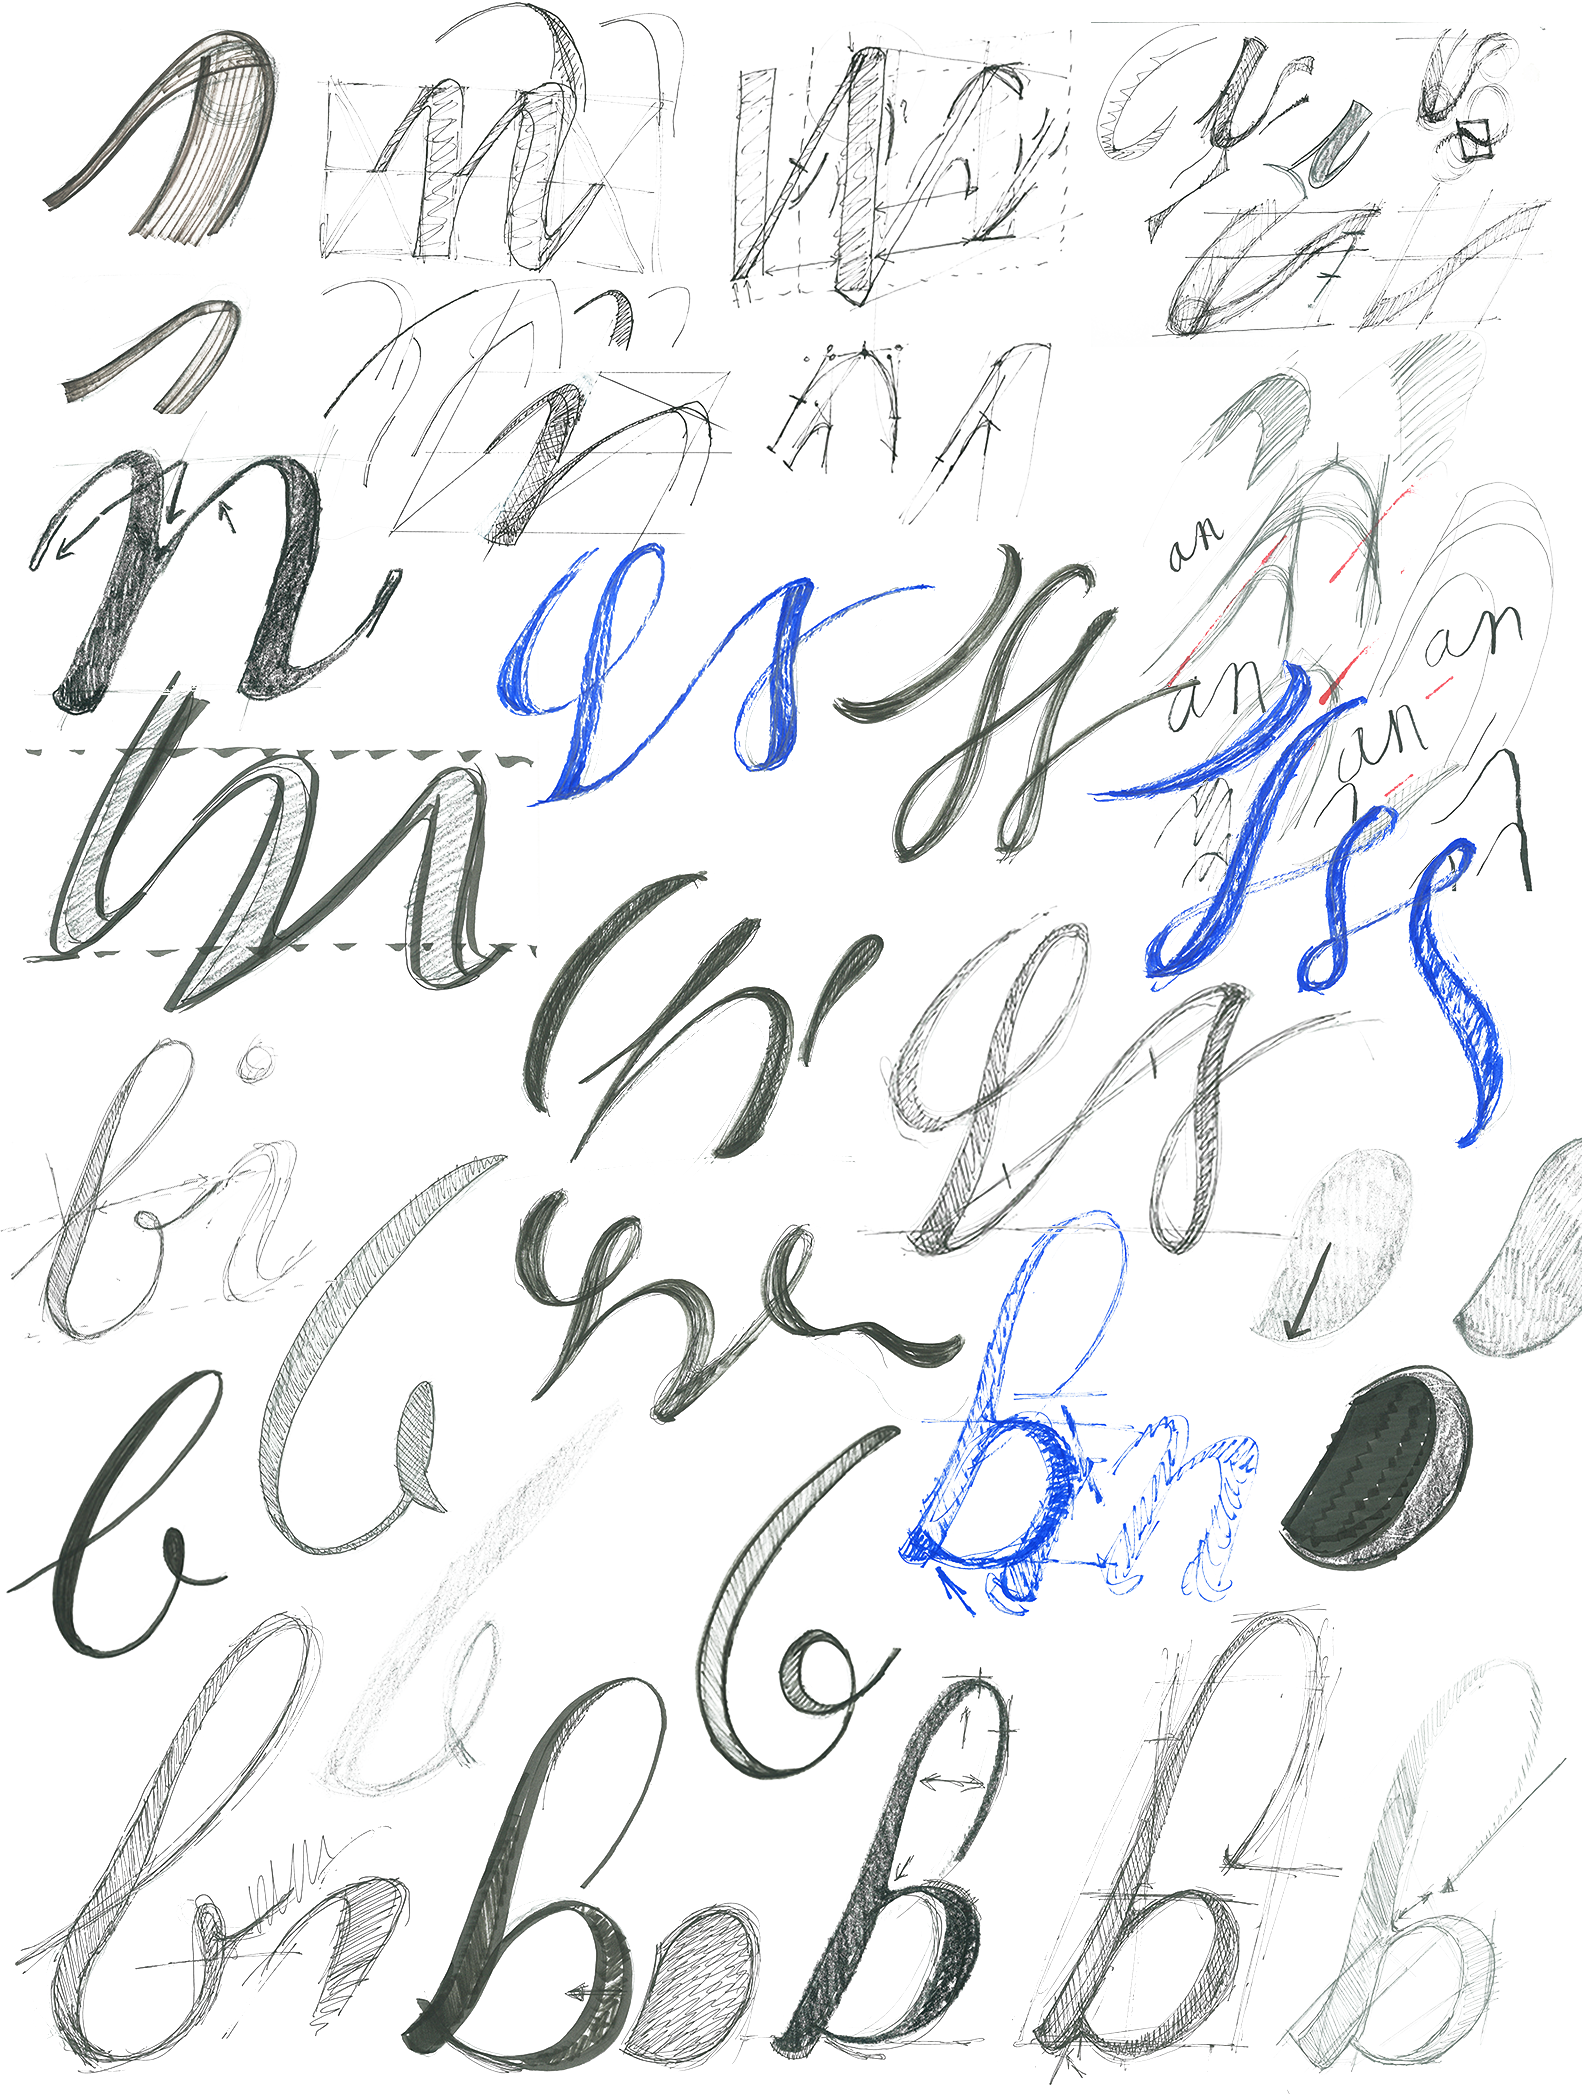 Sketches for a typeface based on the wrting hand of a whaling ship master sailing in the 19th C.